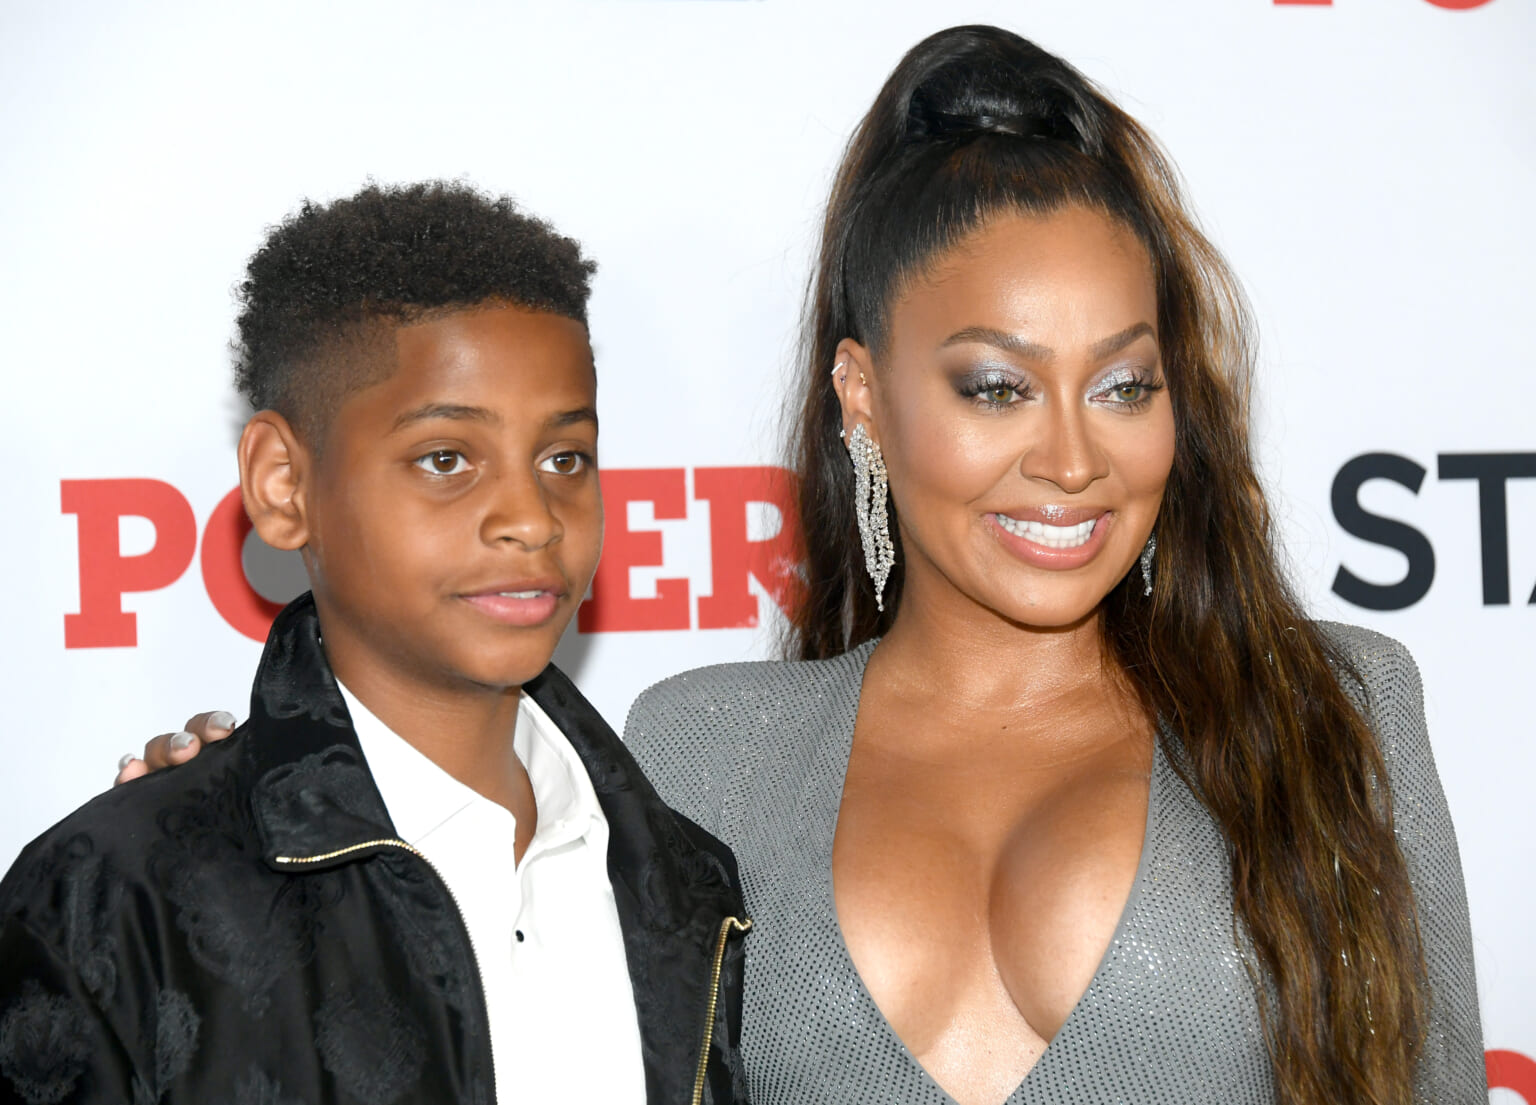 Lala Anthony says she hopes son Kiyan will attend an HBCU TheGrio